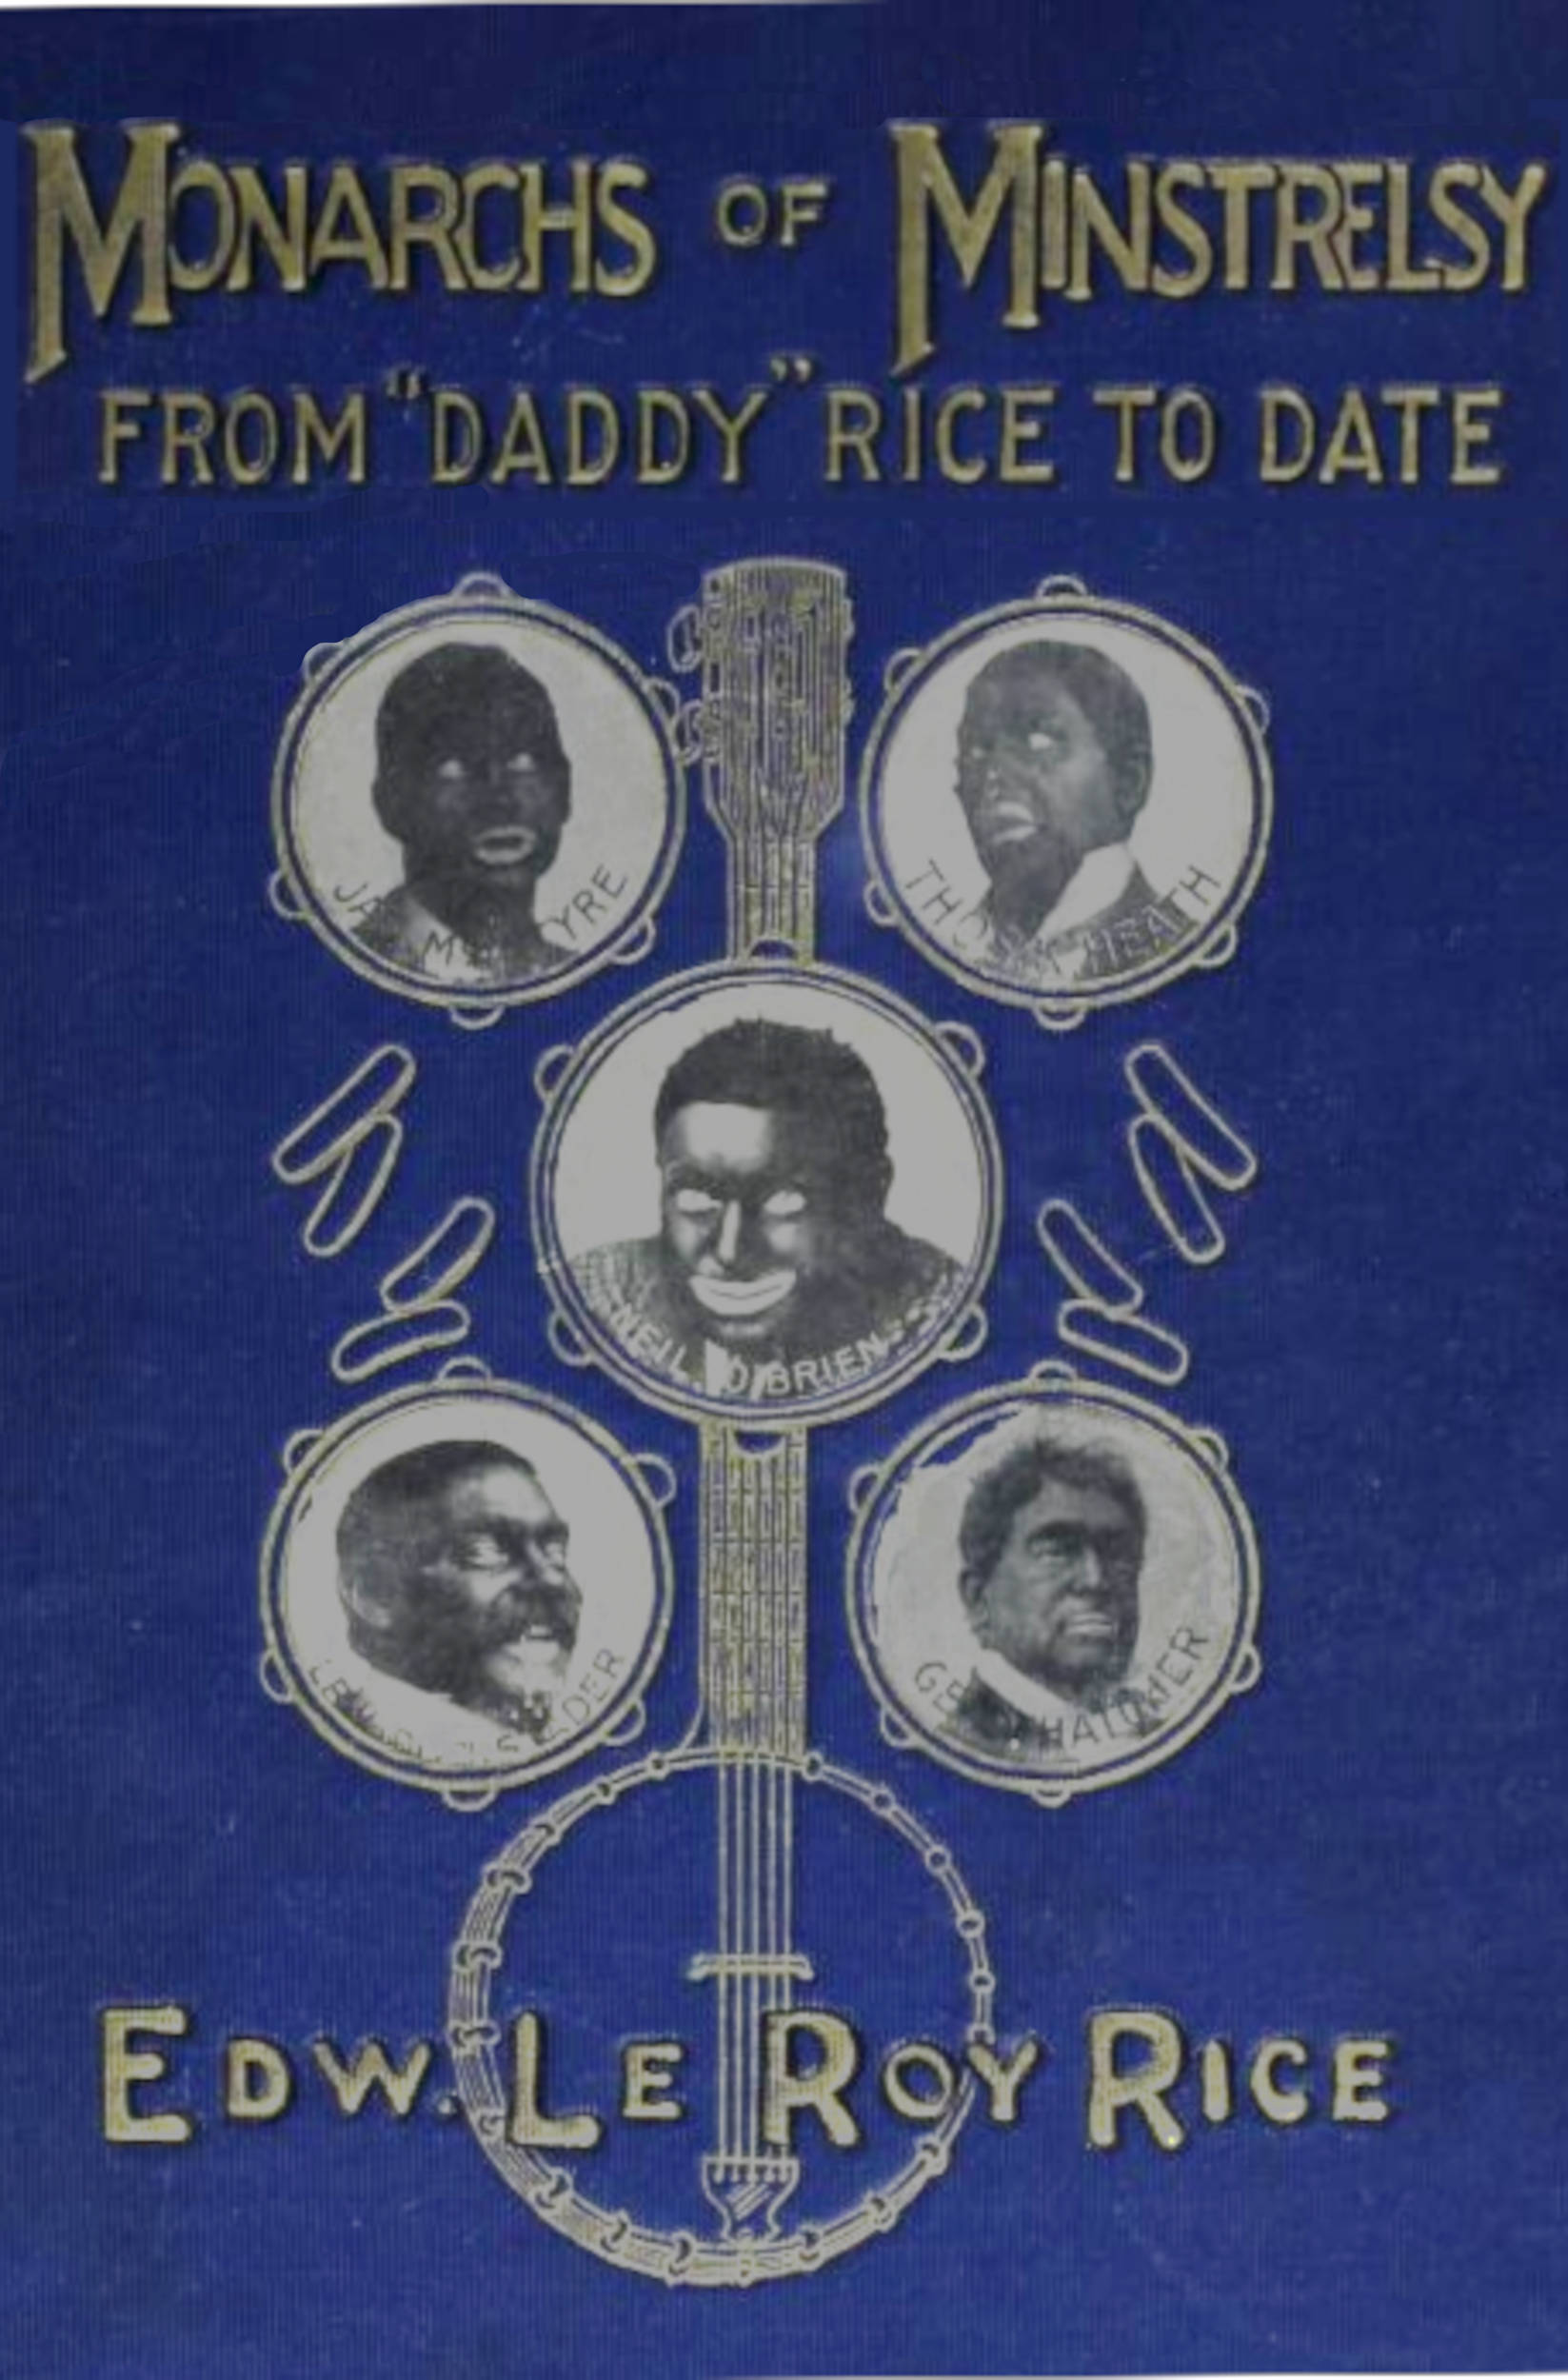 Monarchs of minstrelsy, from Daddy Rice to date, by Edw. Le Roy